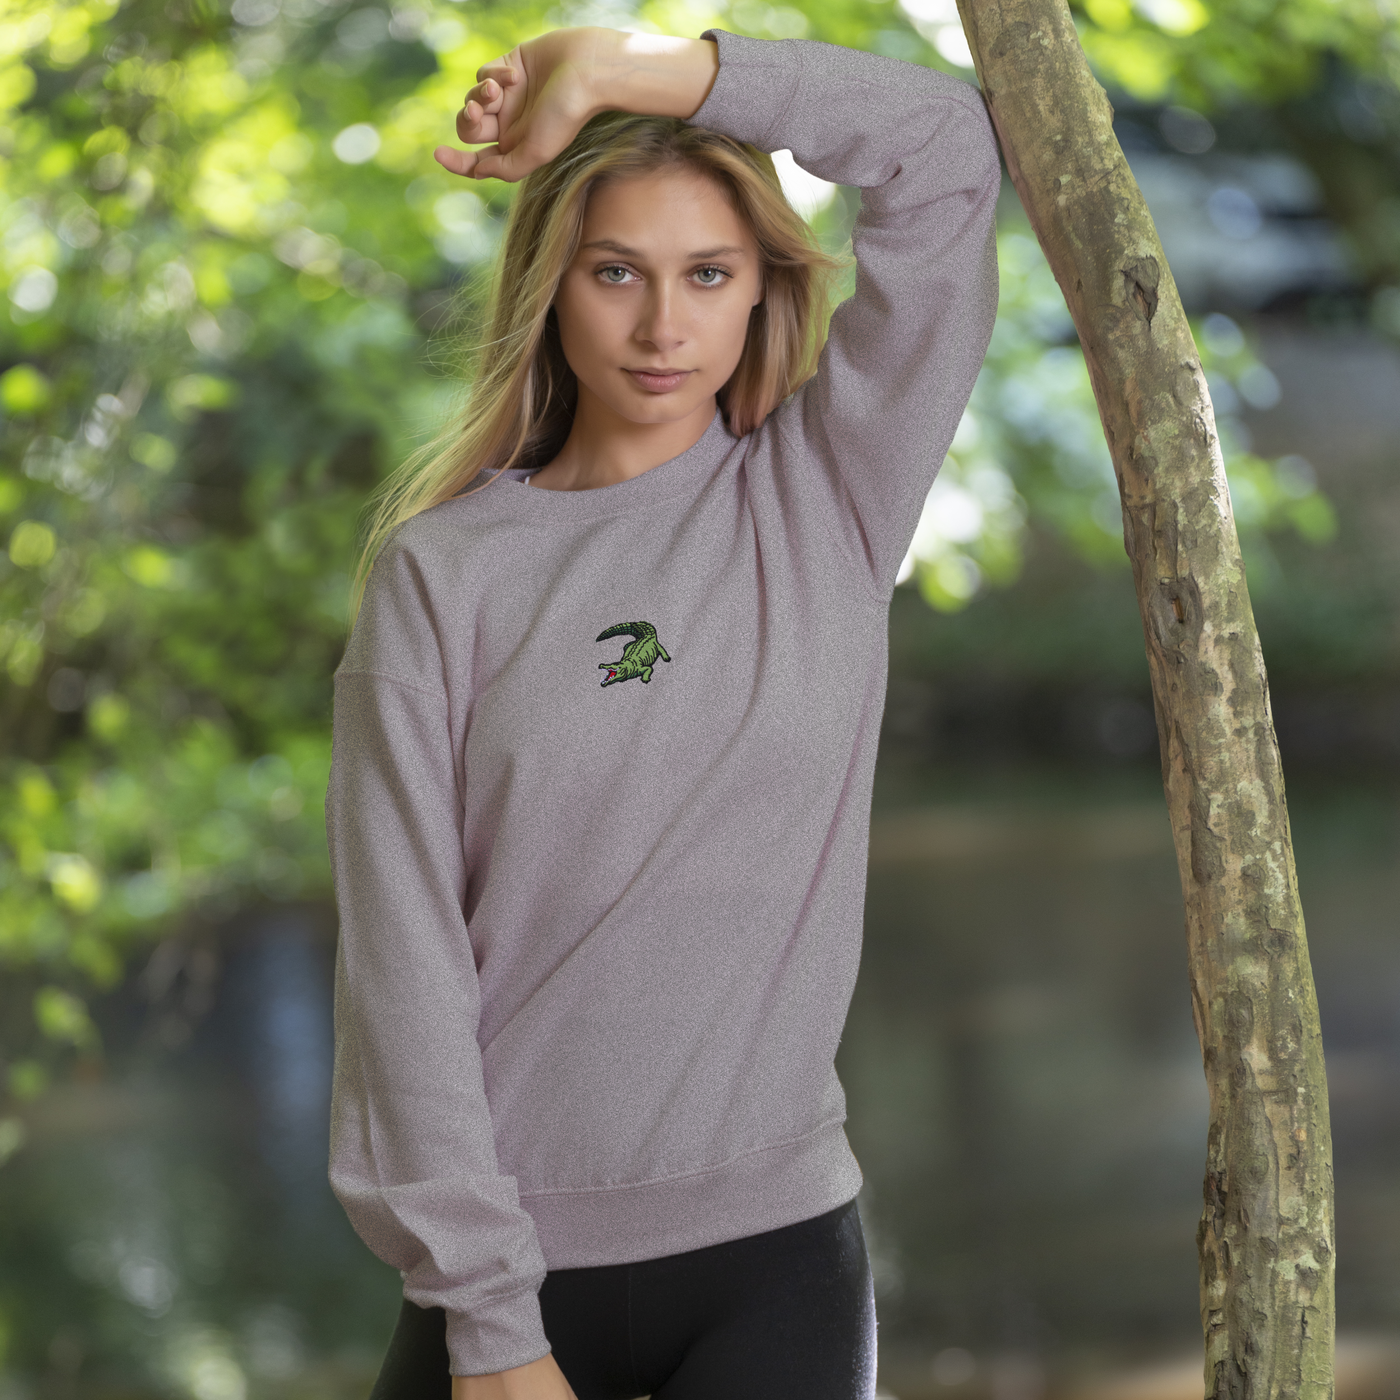 Bobby's Planet Women's Embroidered Saltwater Crocodile Sweatshirt from Australia Down Under Animals Collection in Sport Grey Color#color_sport-grey